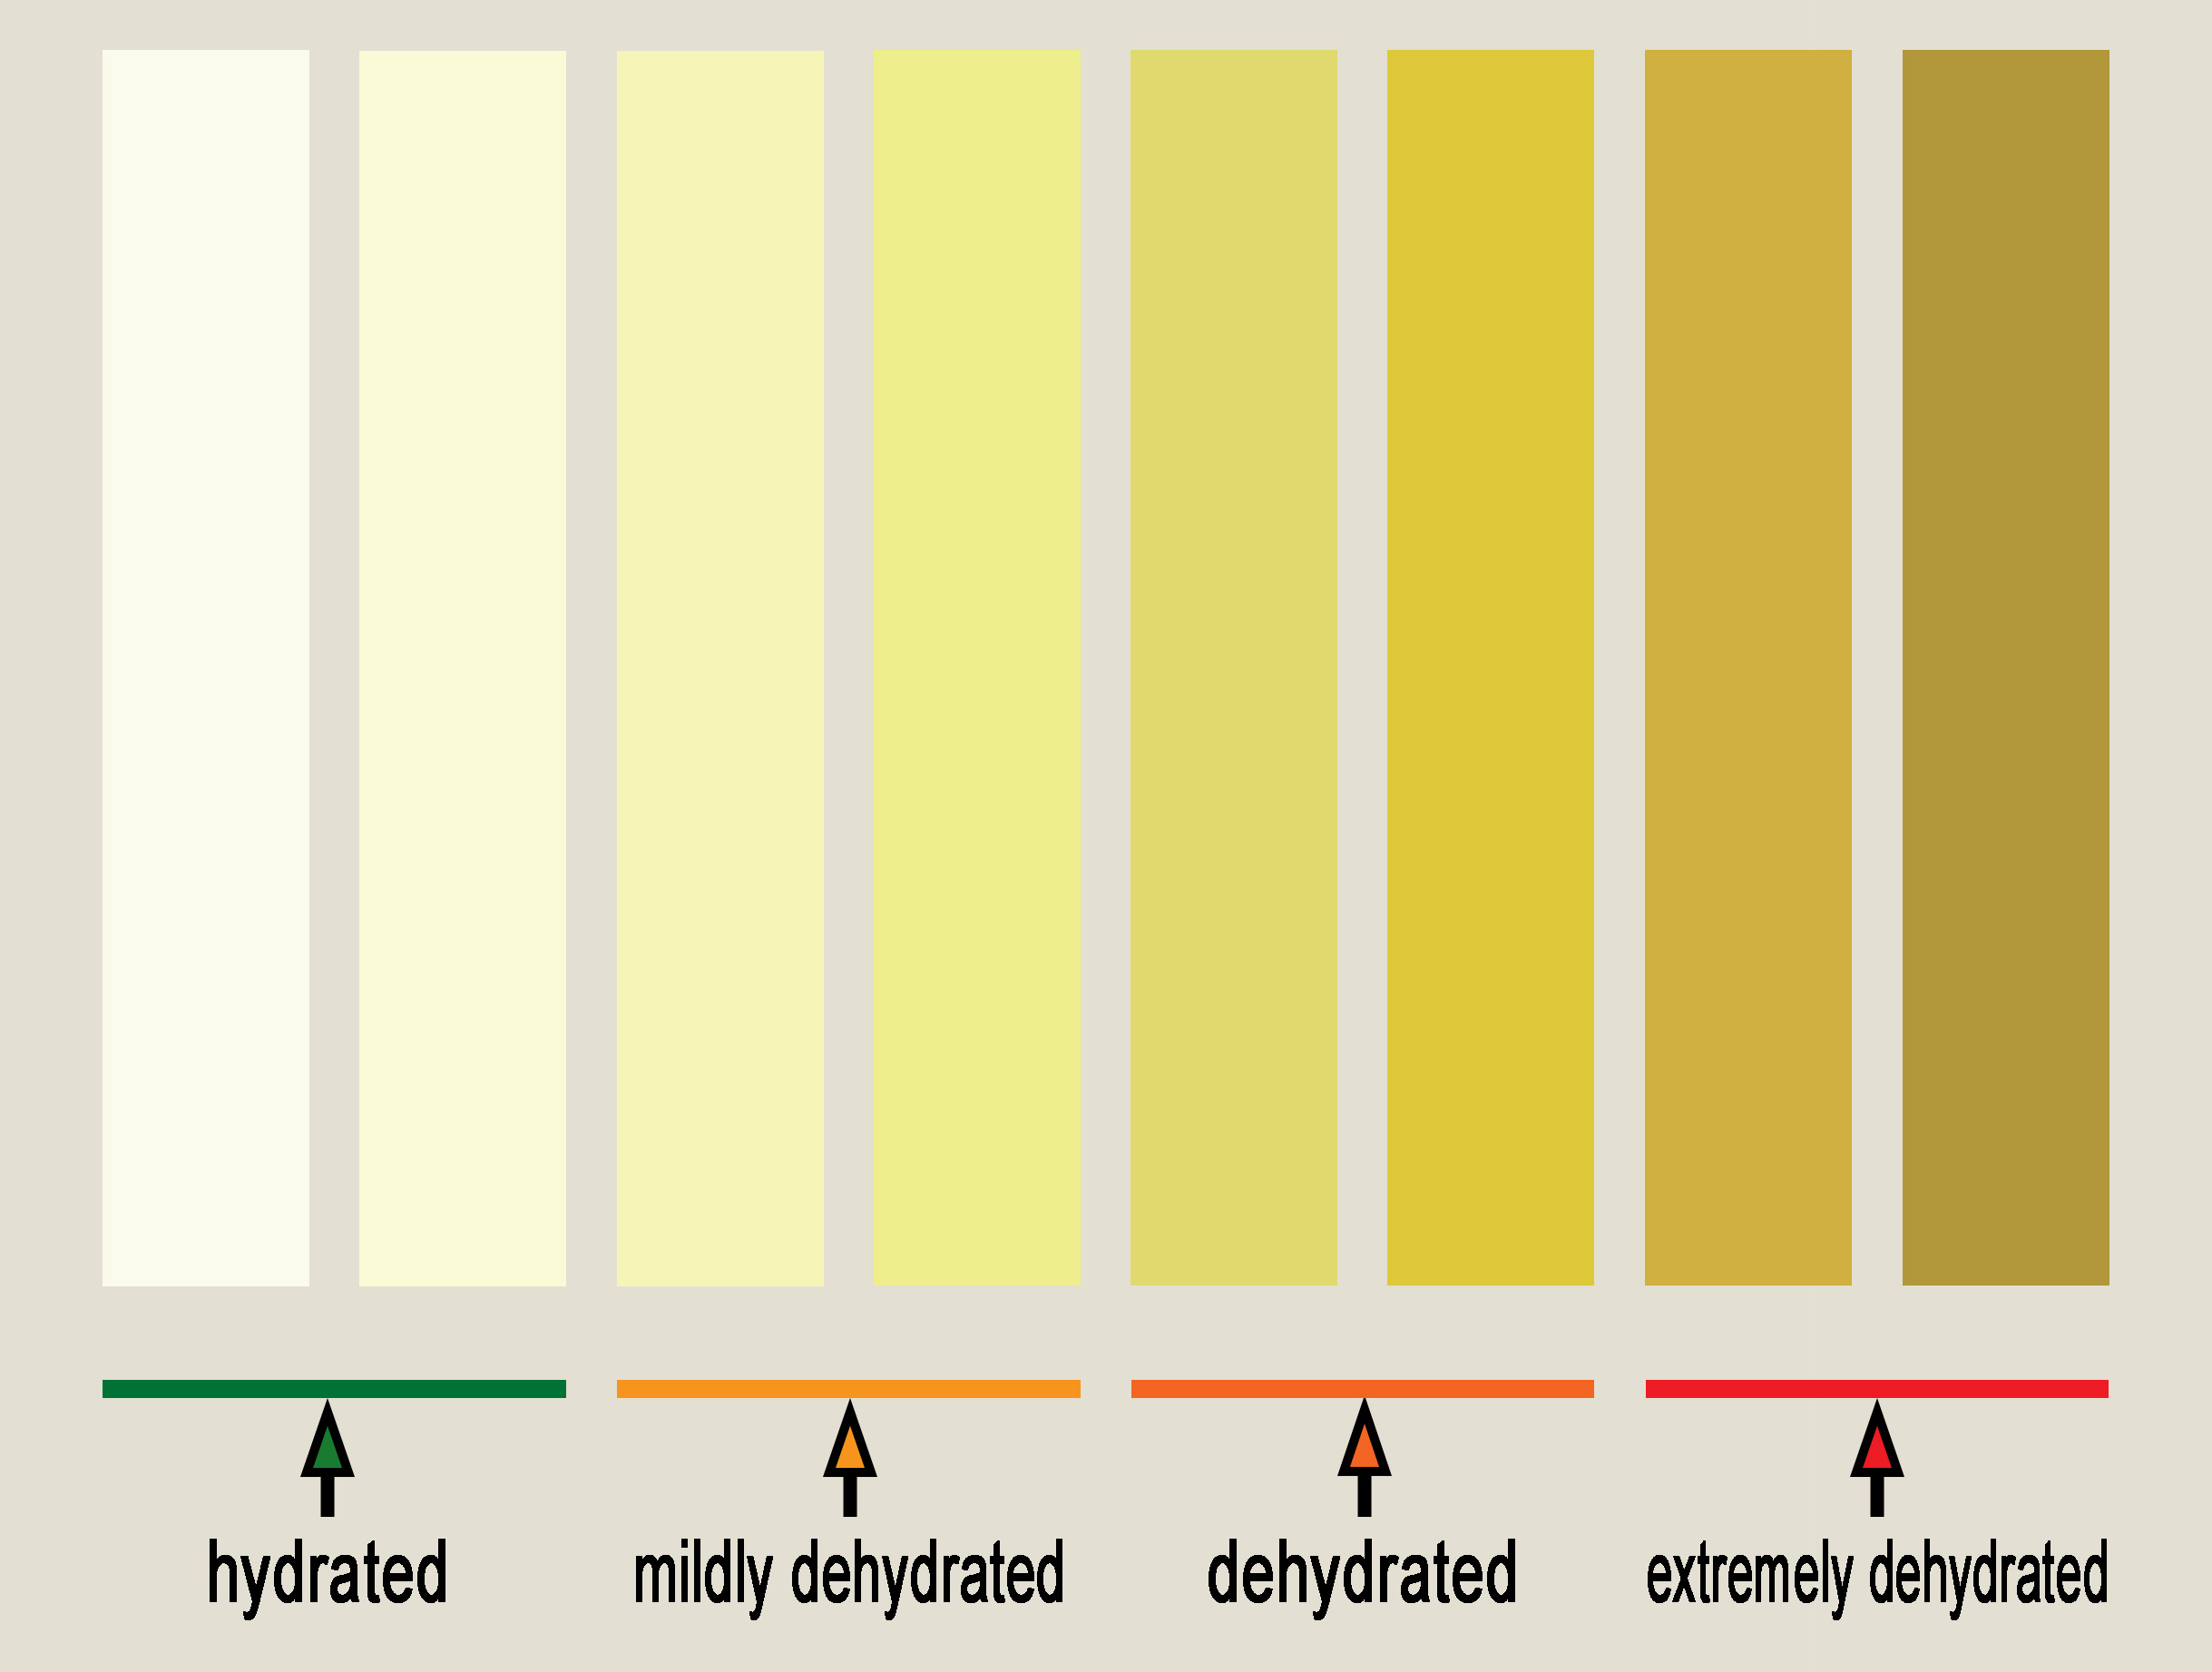 Urine color chart used to determine hydration status. Pale yellow and clear urine indicates hydration; darker yellow to brown urine indicates dehydration.